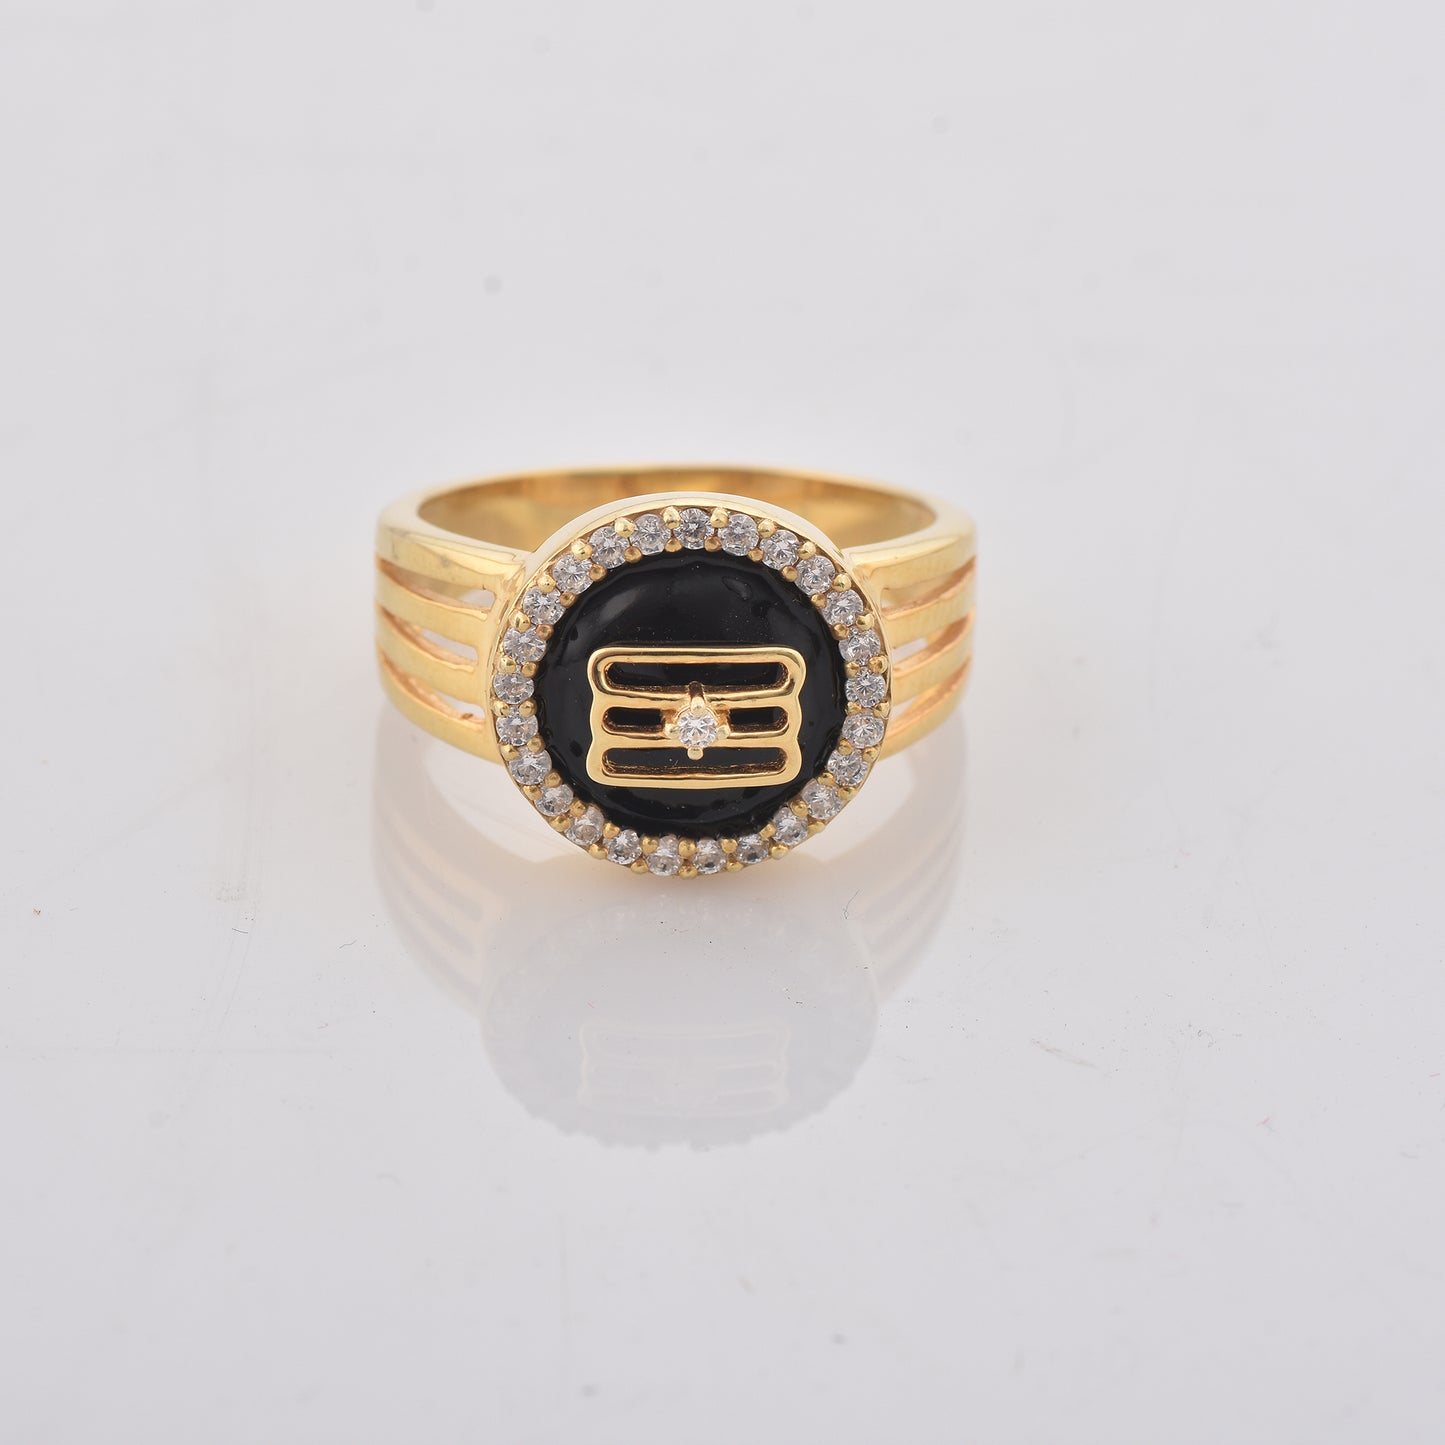 Shiva Tilak Ring Father's Day Gift